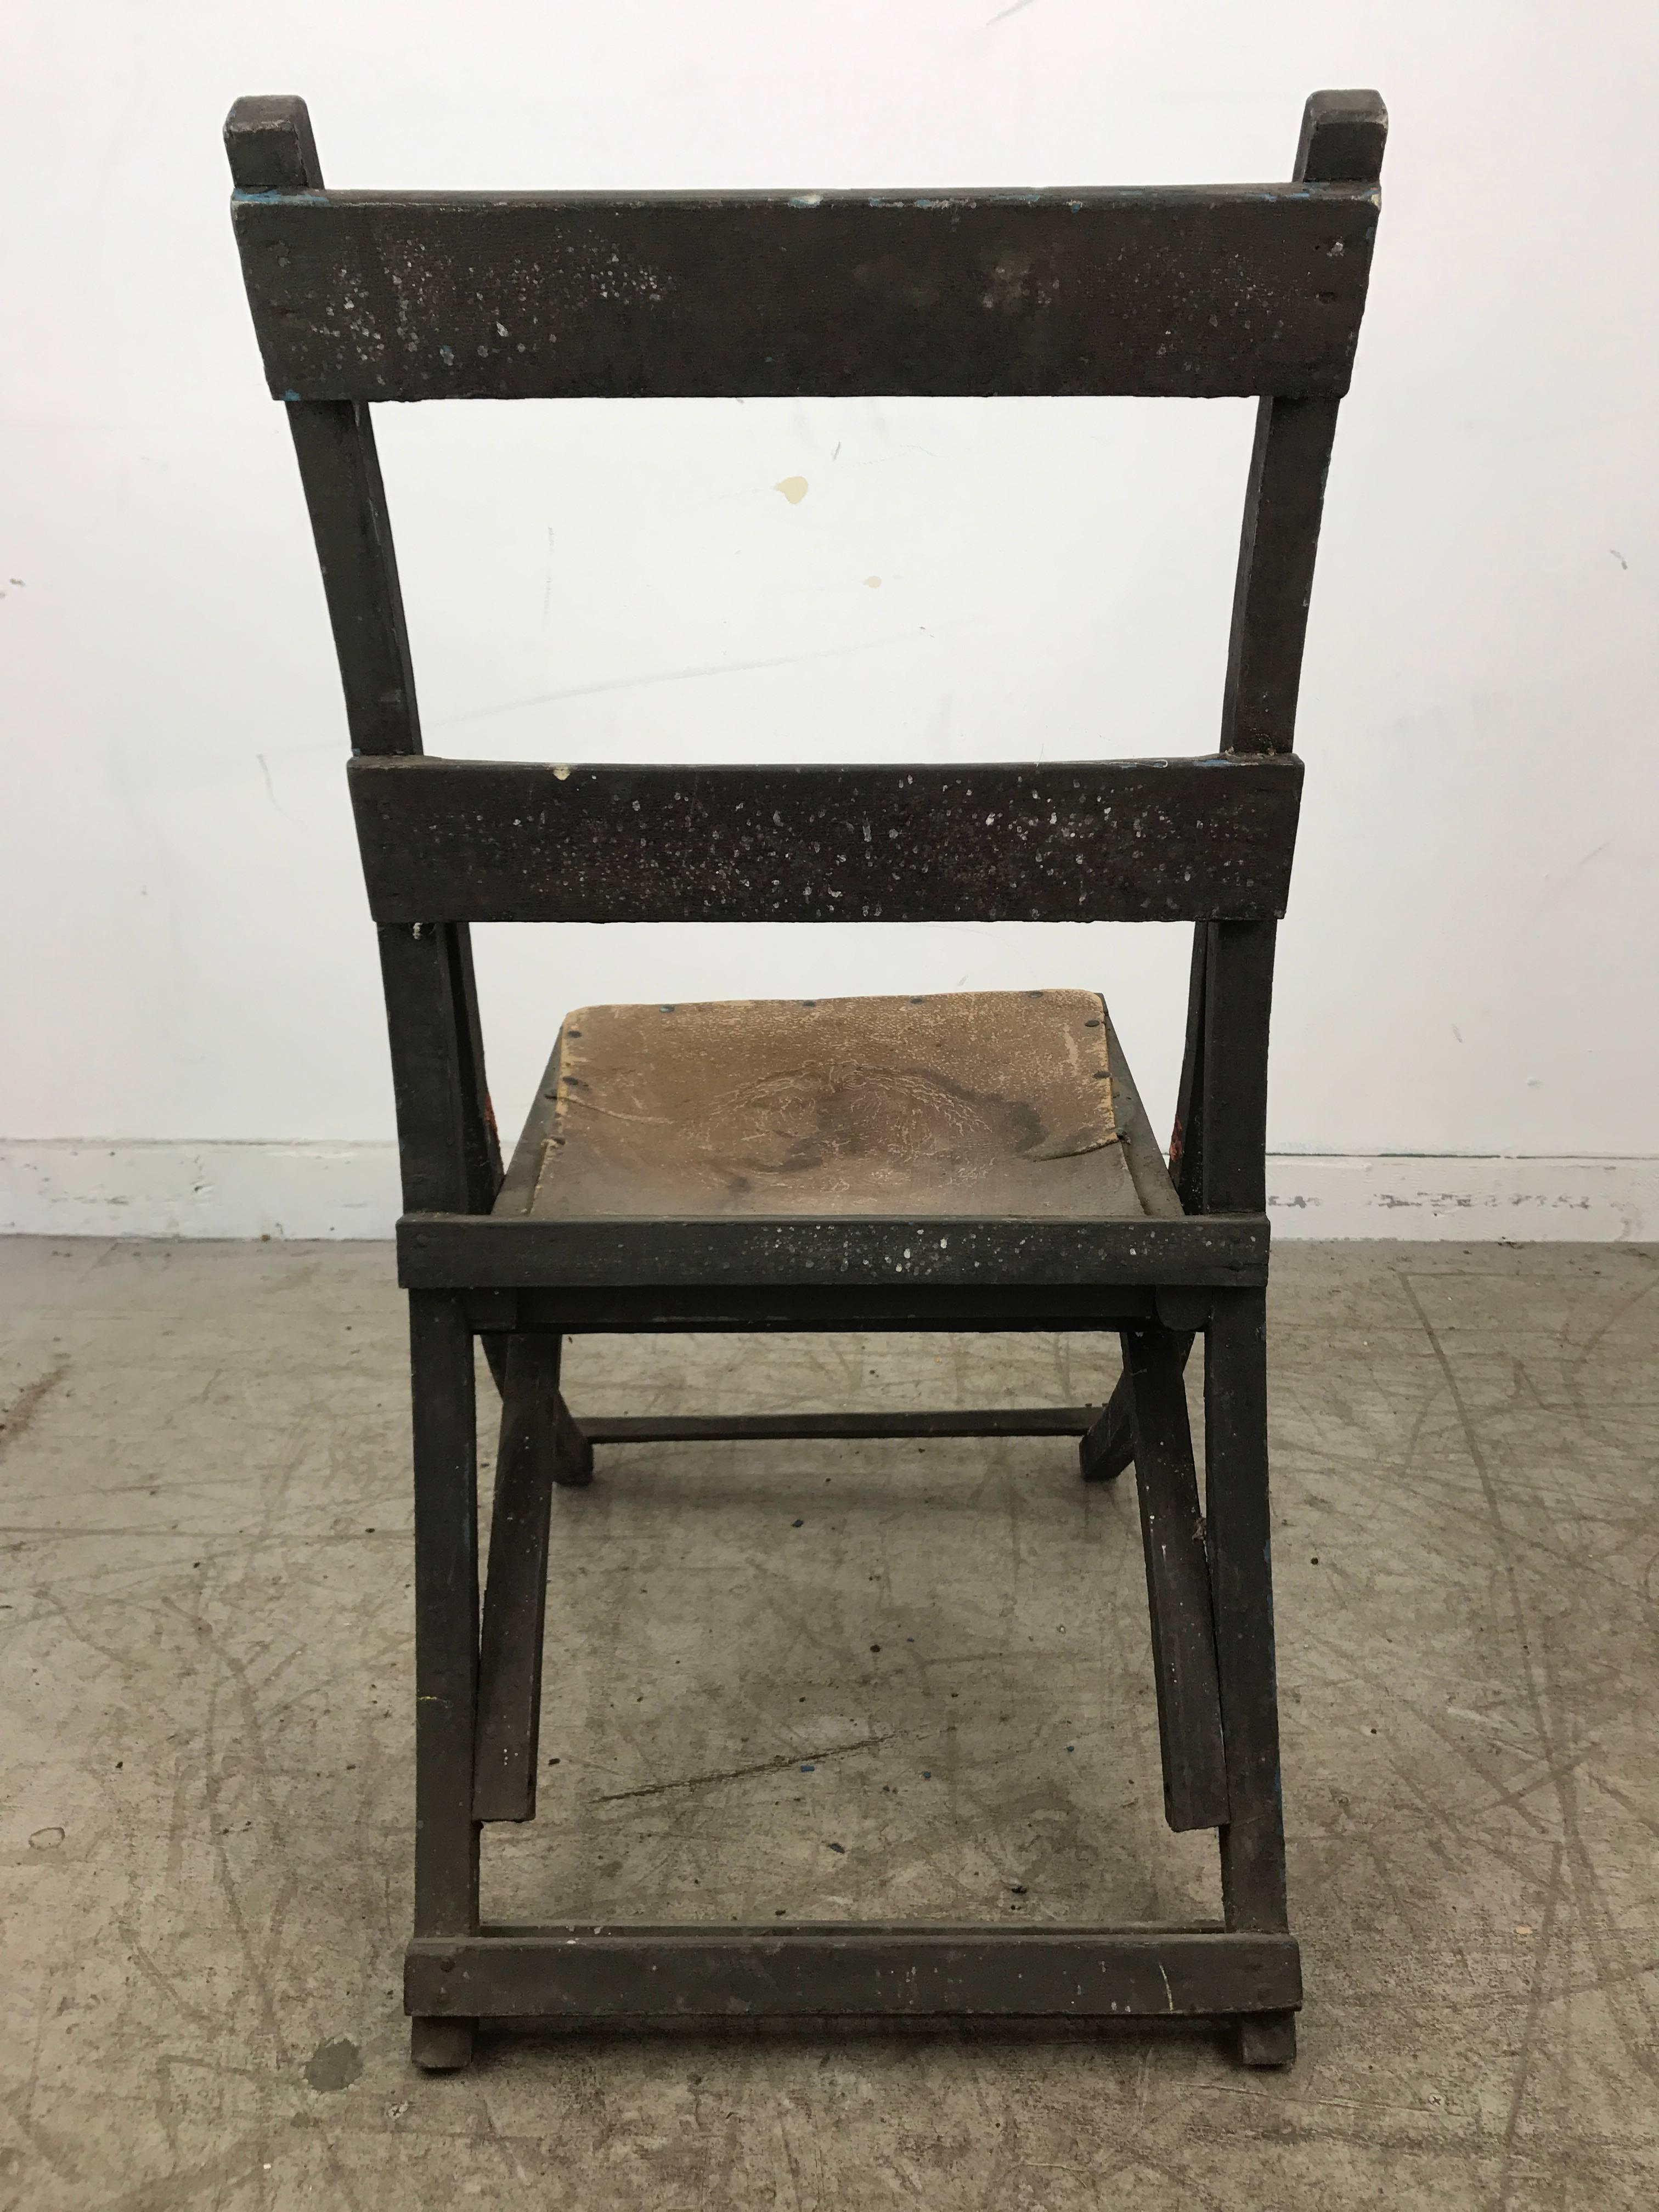 Early Sucsessionist Jugendstil Folding Chair in Richard Riemerschmid Manner In Distressed Condition For Sale In Buffalo, NY